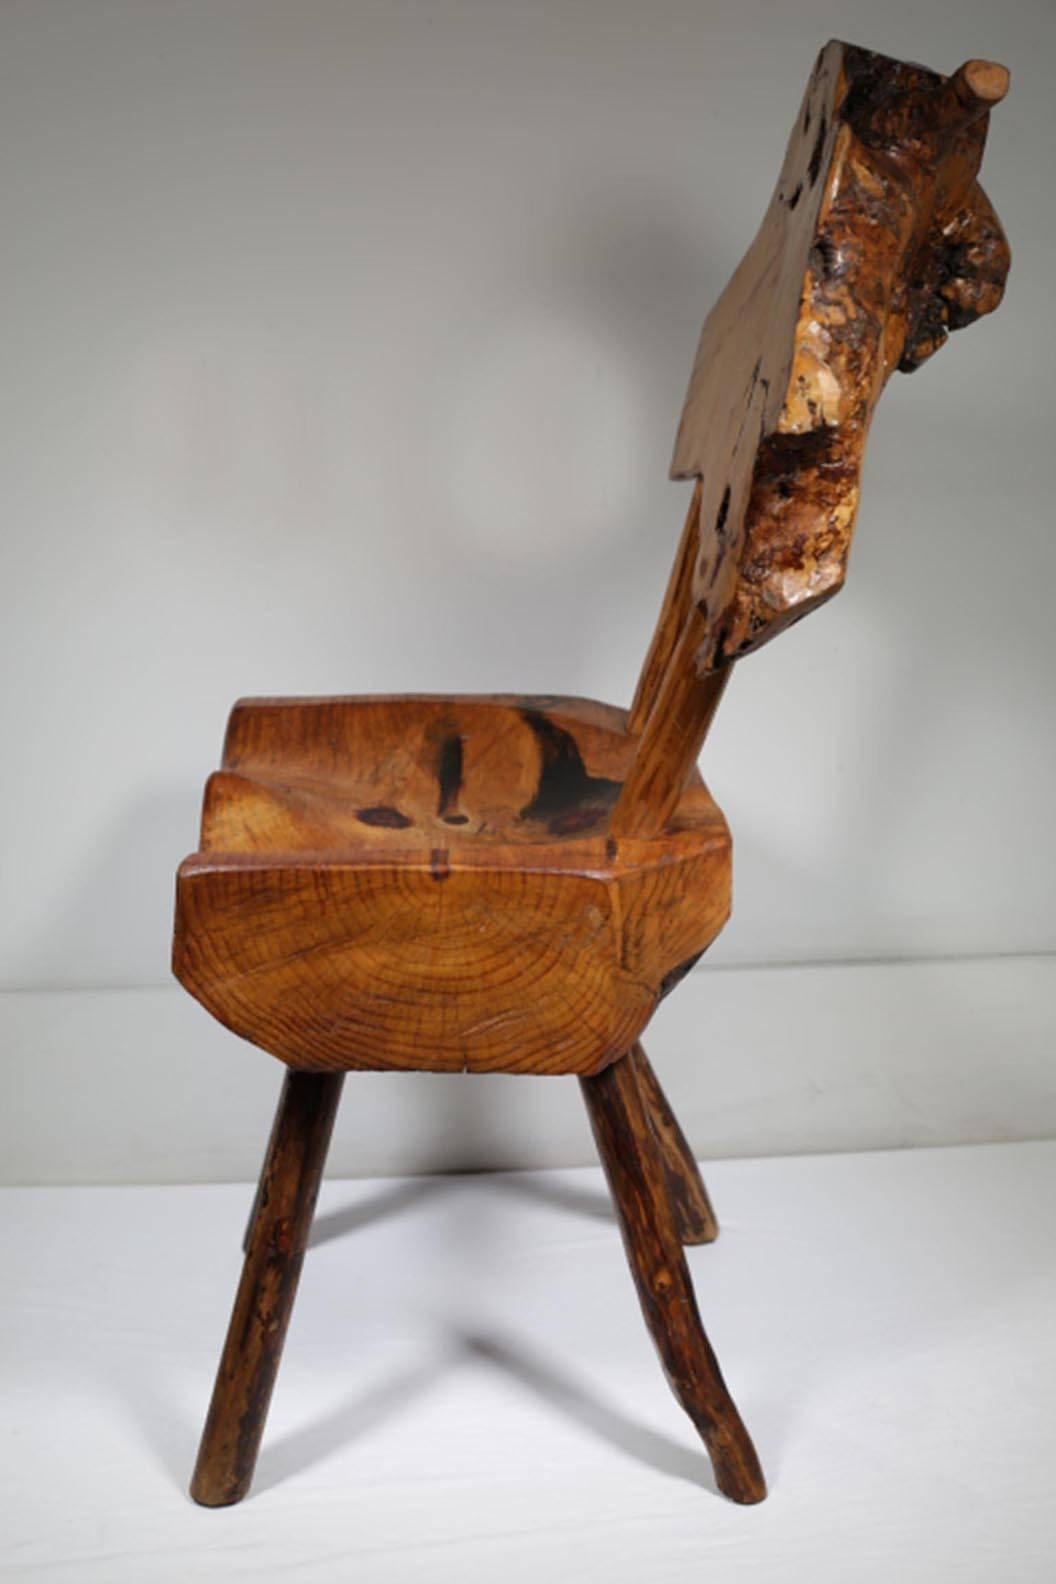 Rustic live edge Hickory and Buckthorn side chair. Very sturdy. Very well made.